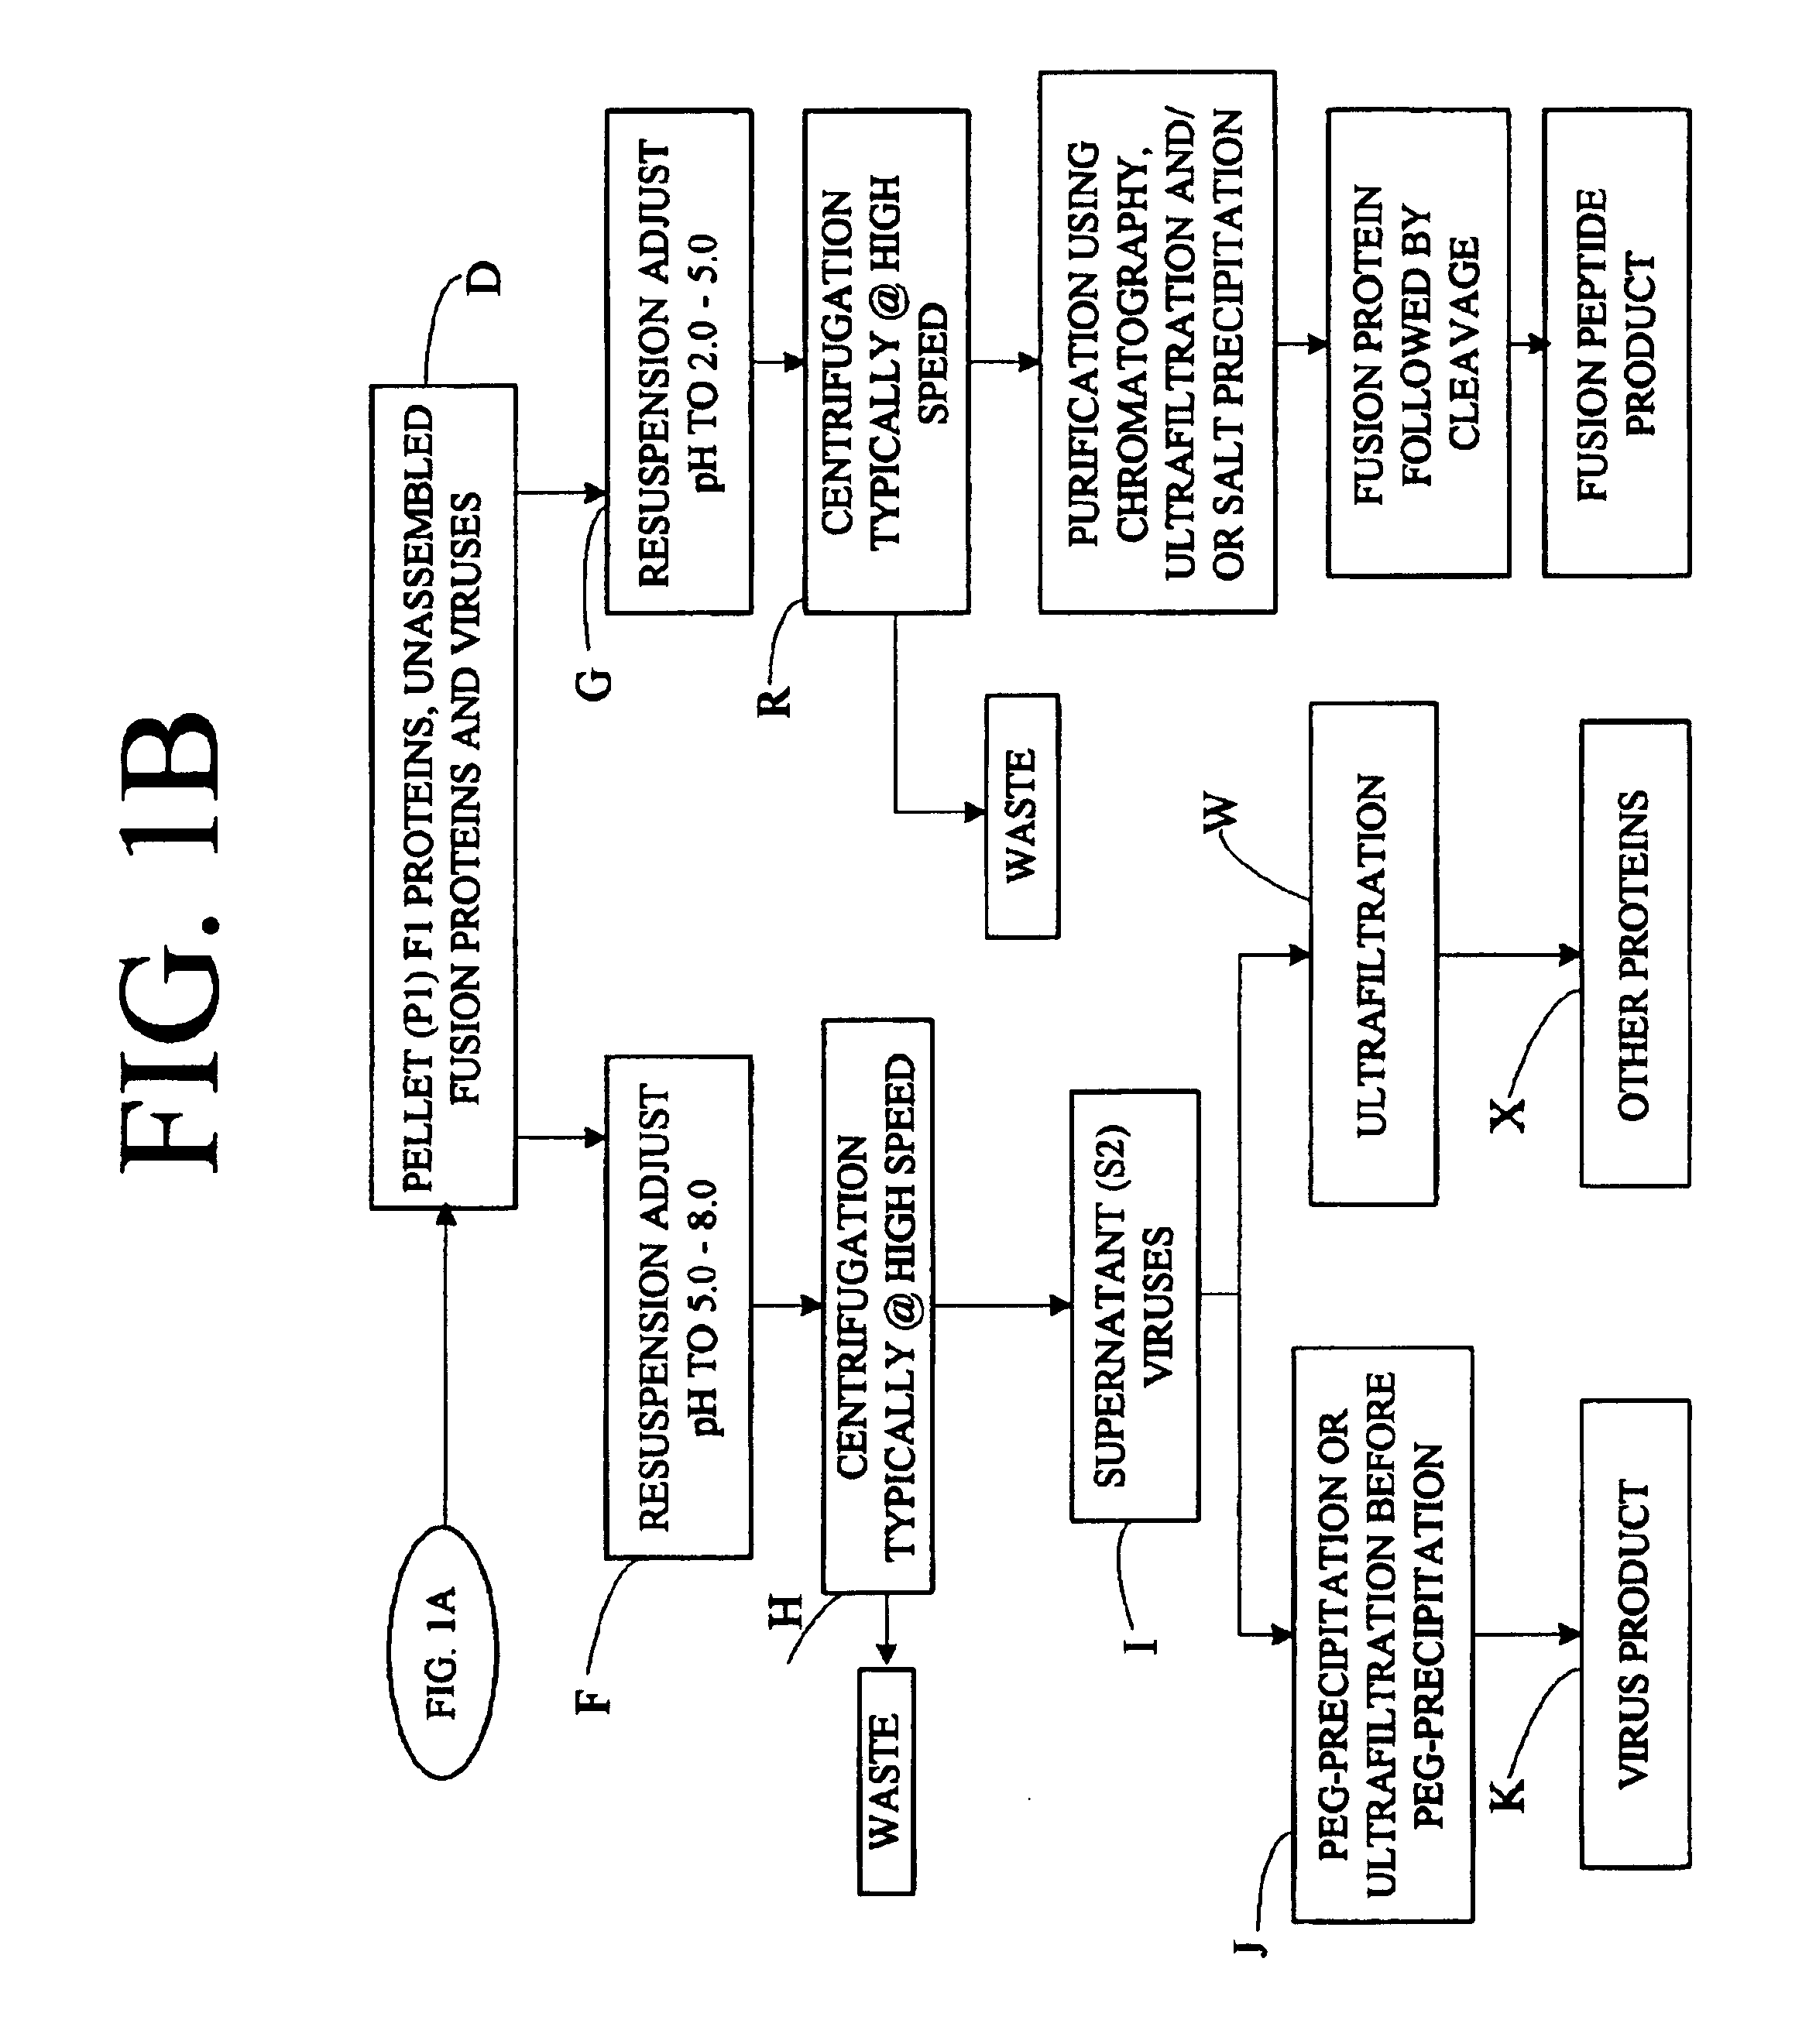 Flexible processing apparatus for isolating and purifying viruses, soluble proteins and peptides from plant sources